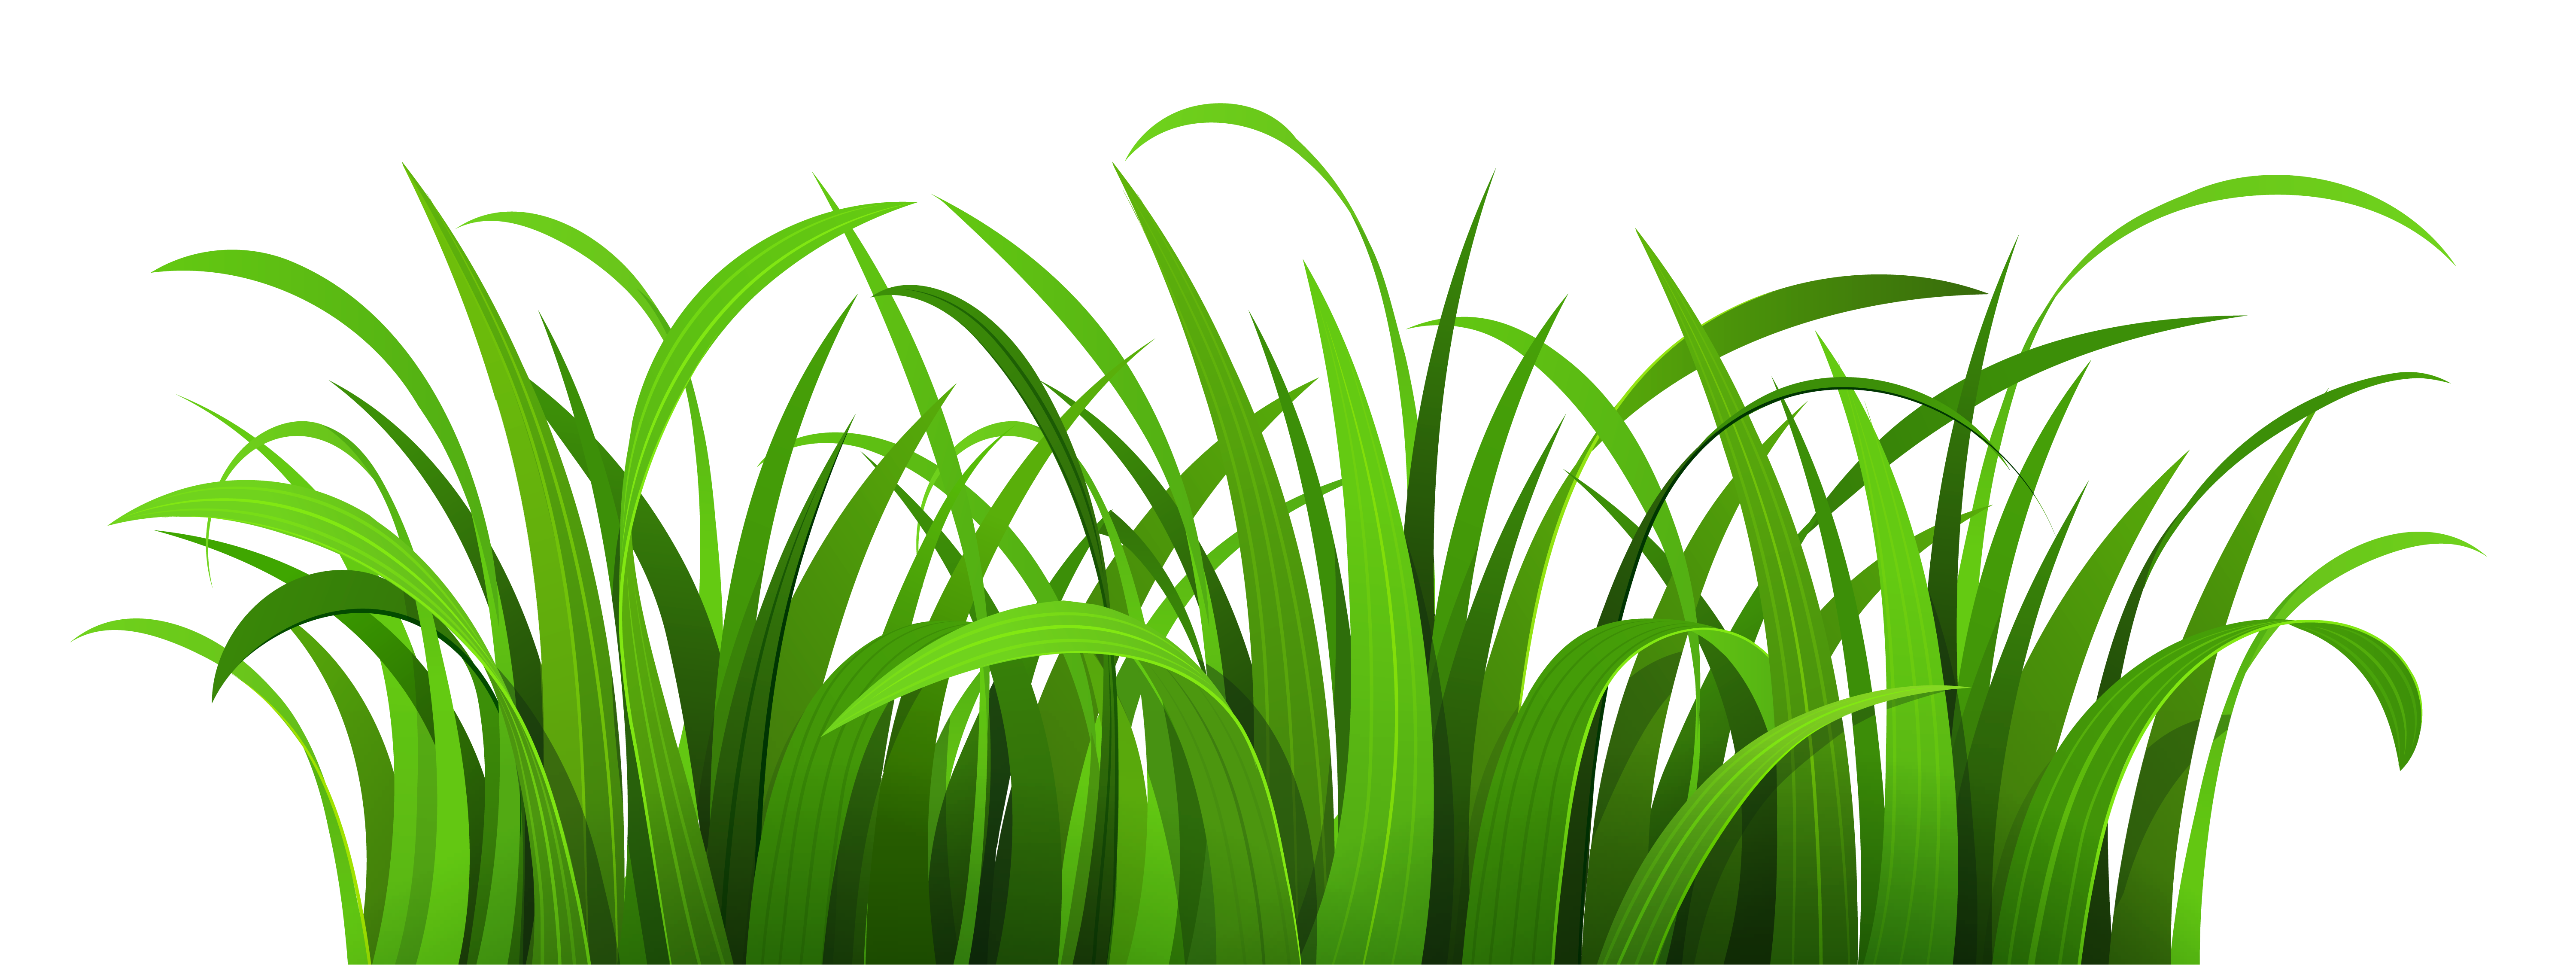 Grass Clip Art Free | Clipart library - Free Clipart Images